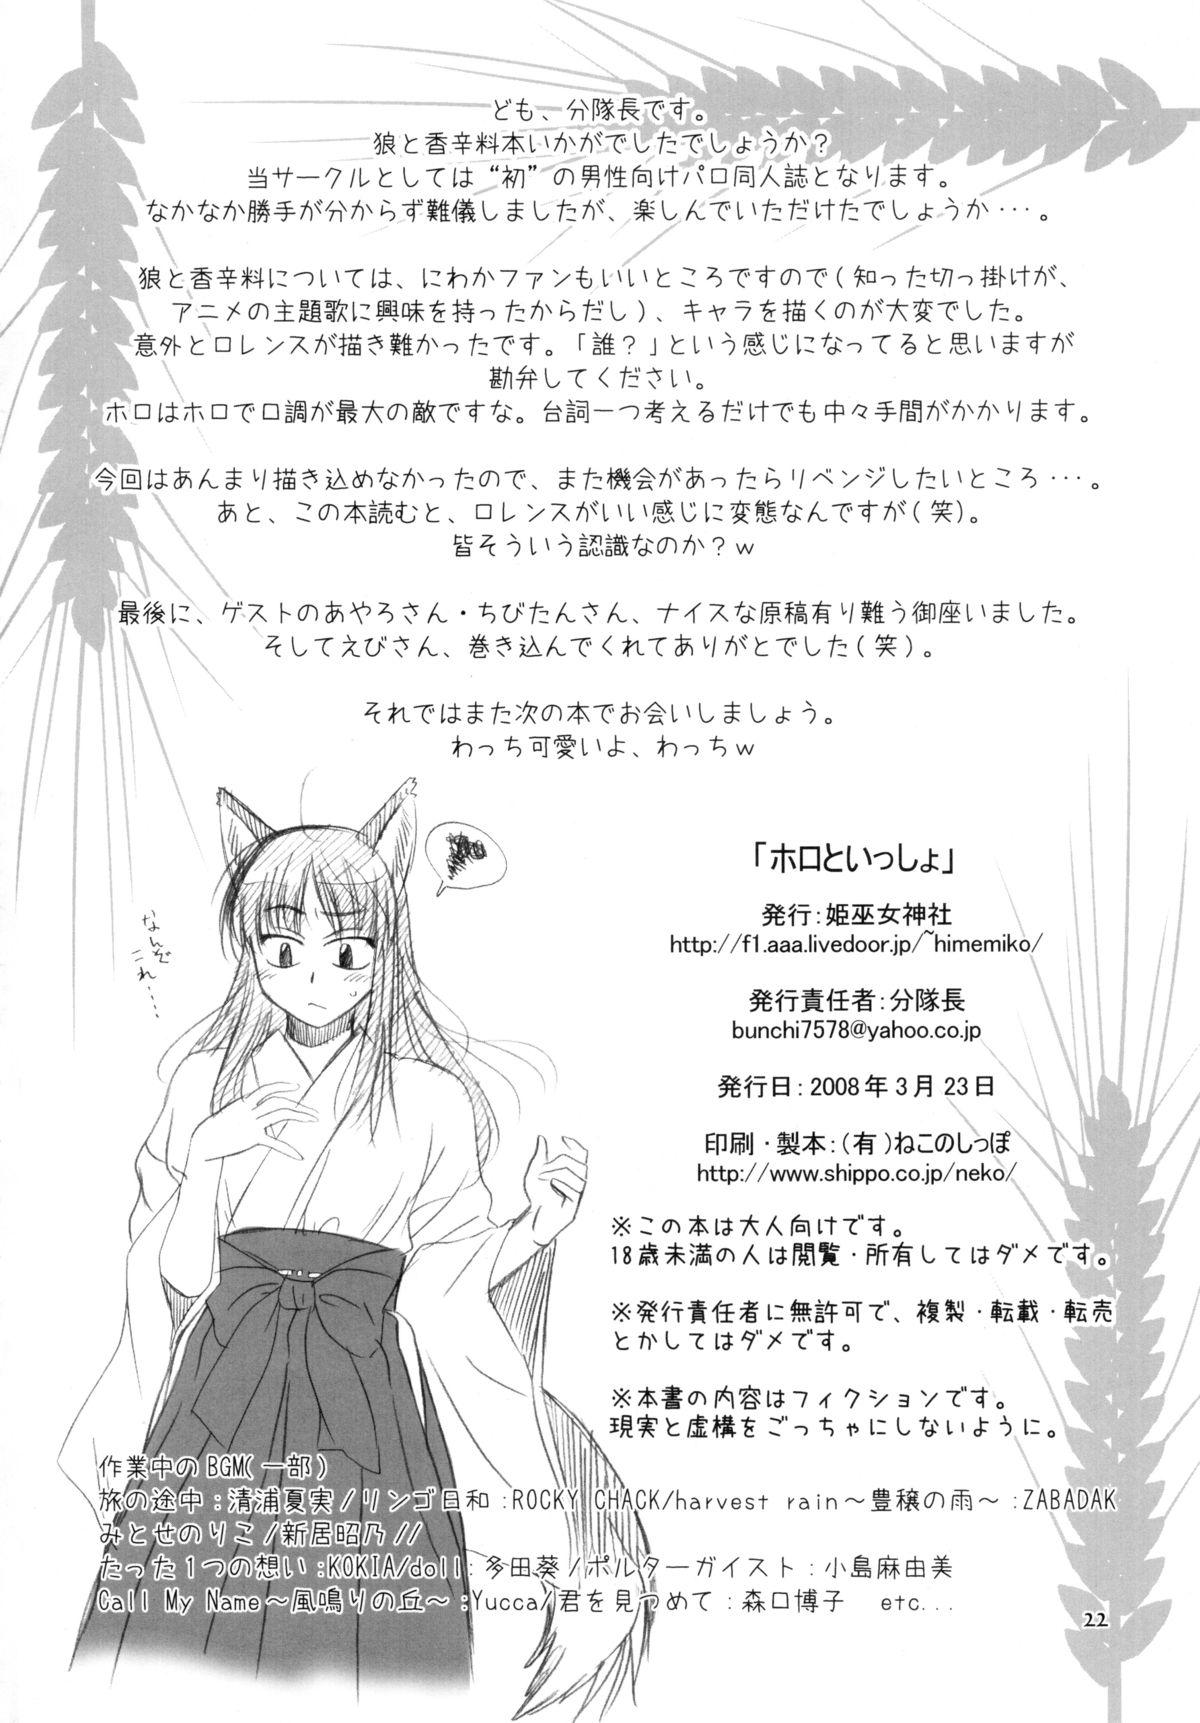 Cheerleader Holo to Issho - Spice and wolf Casal - Page 22